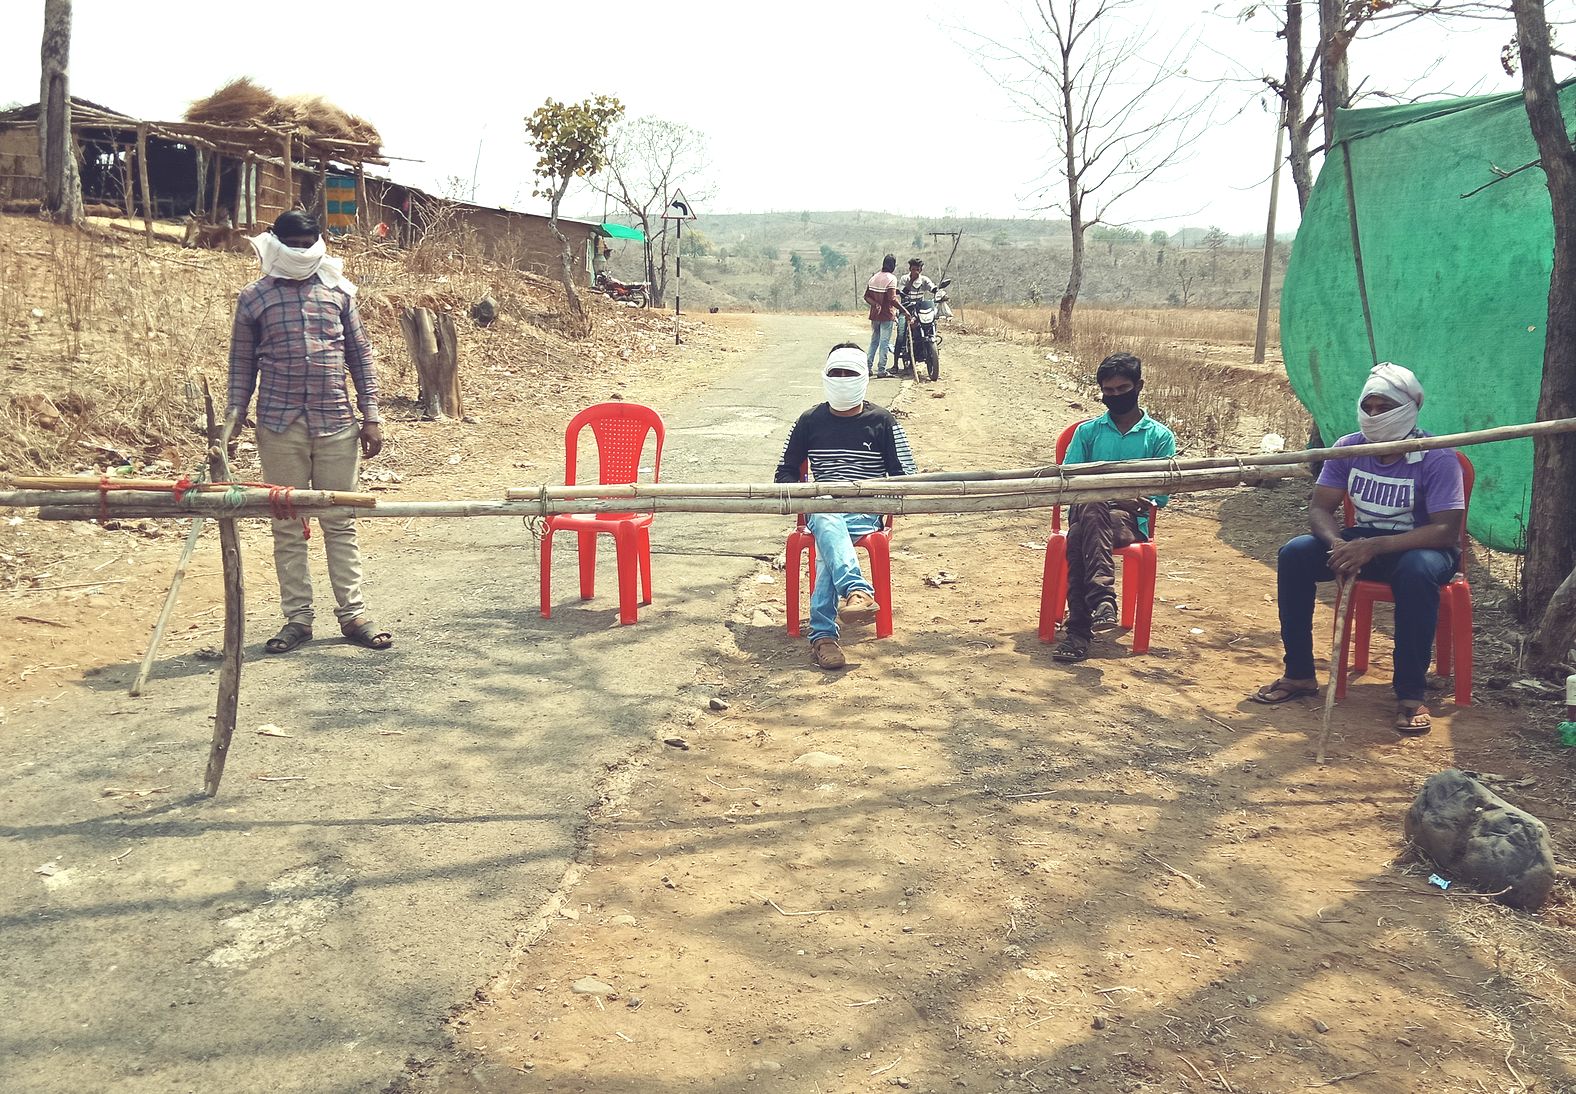 This village became an example, sealing the border and monitoring the villagers themselves